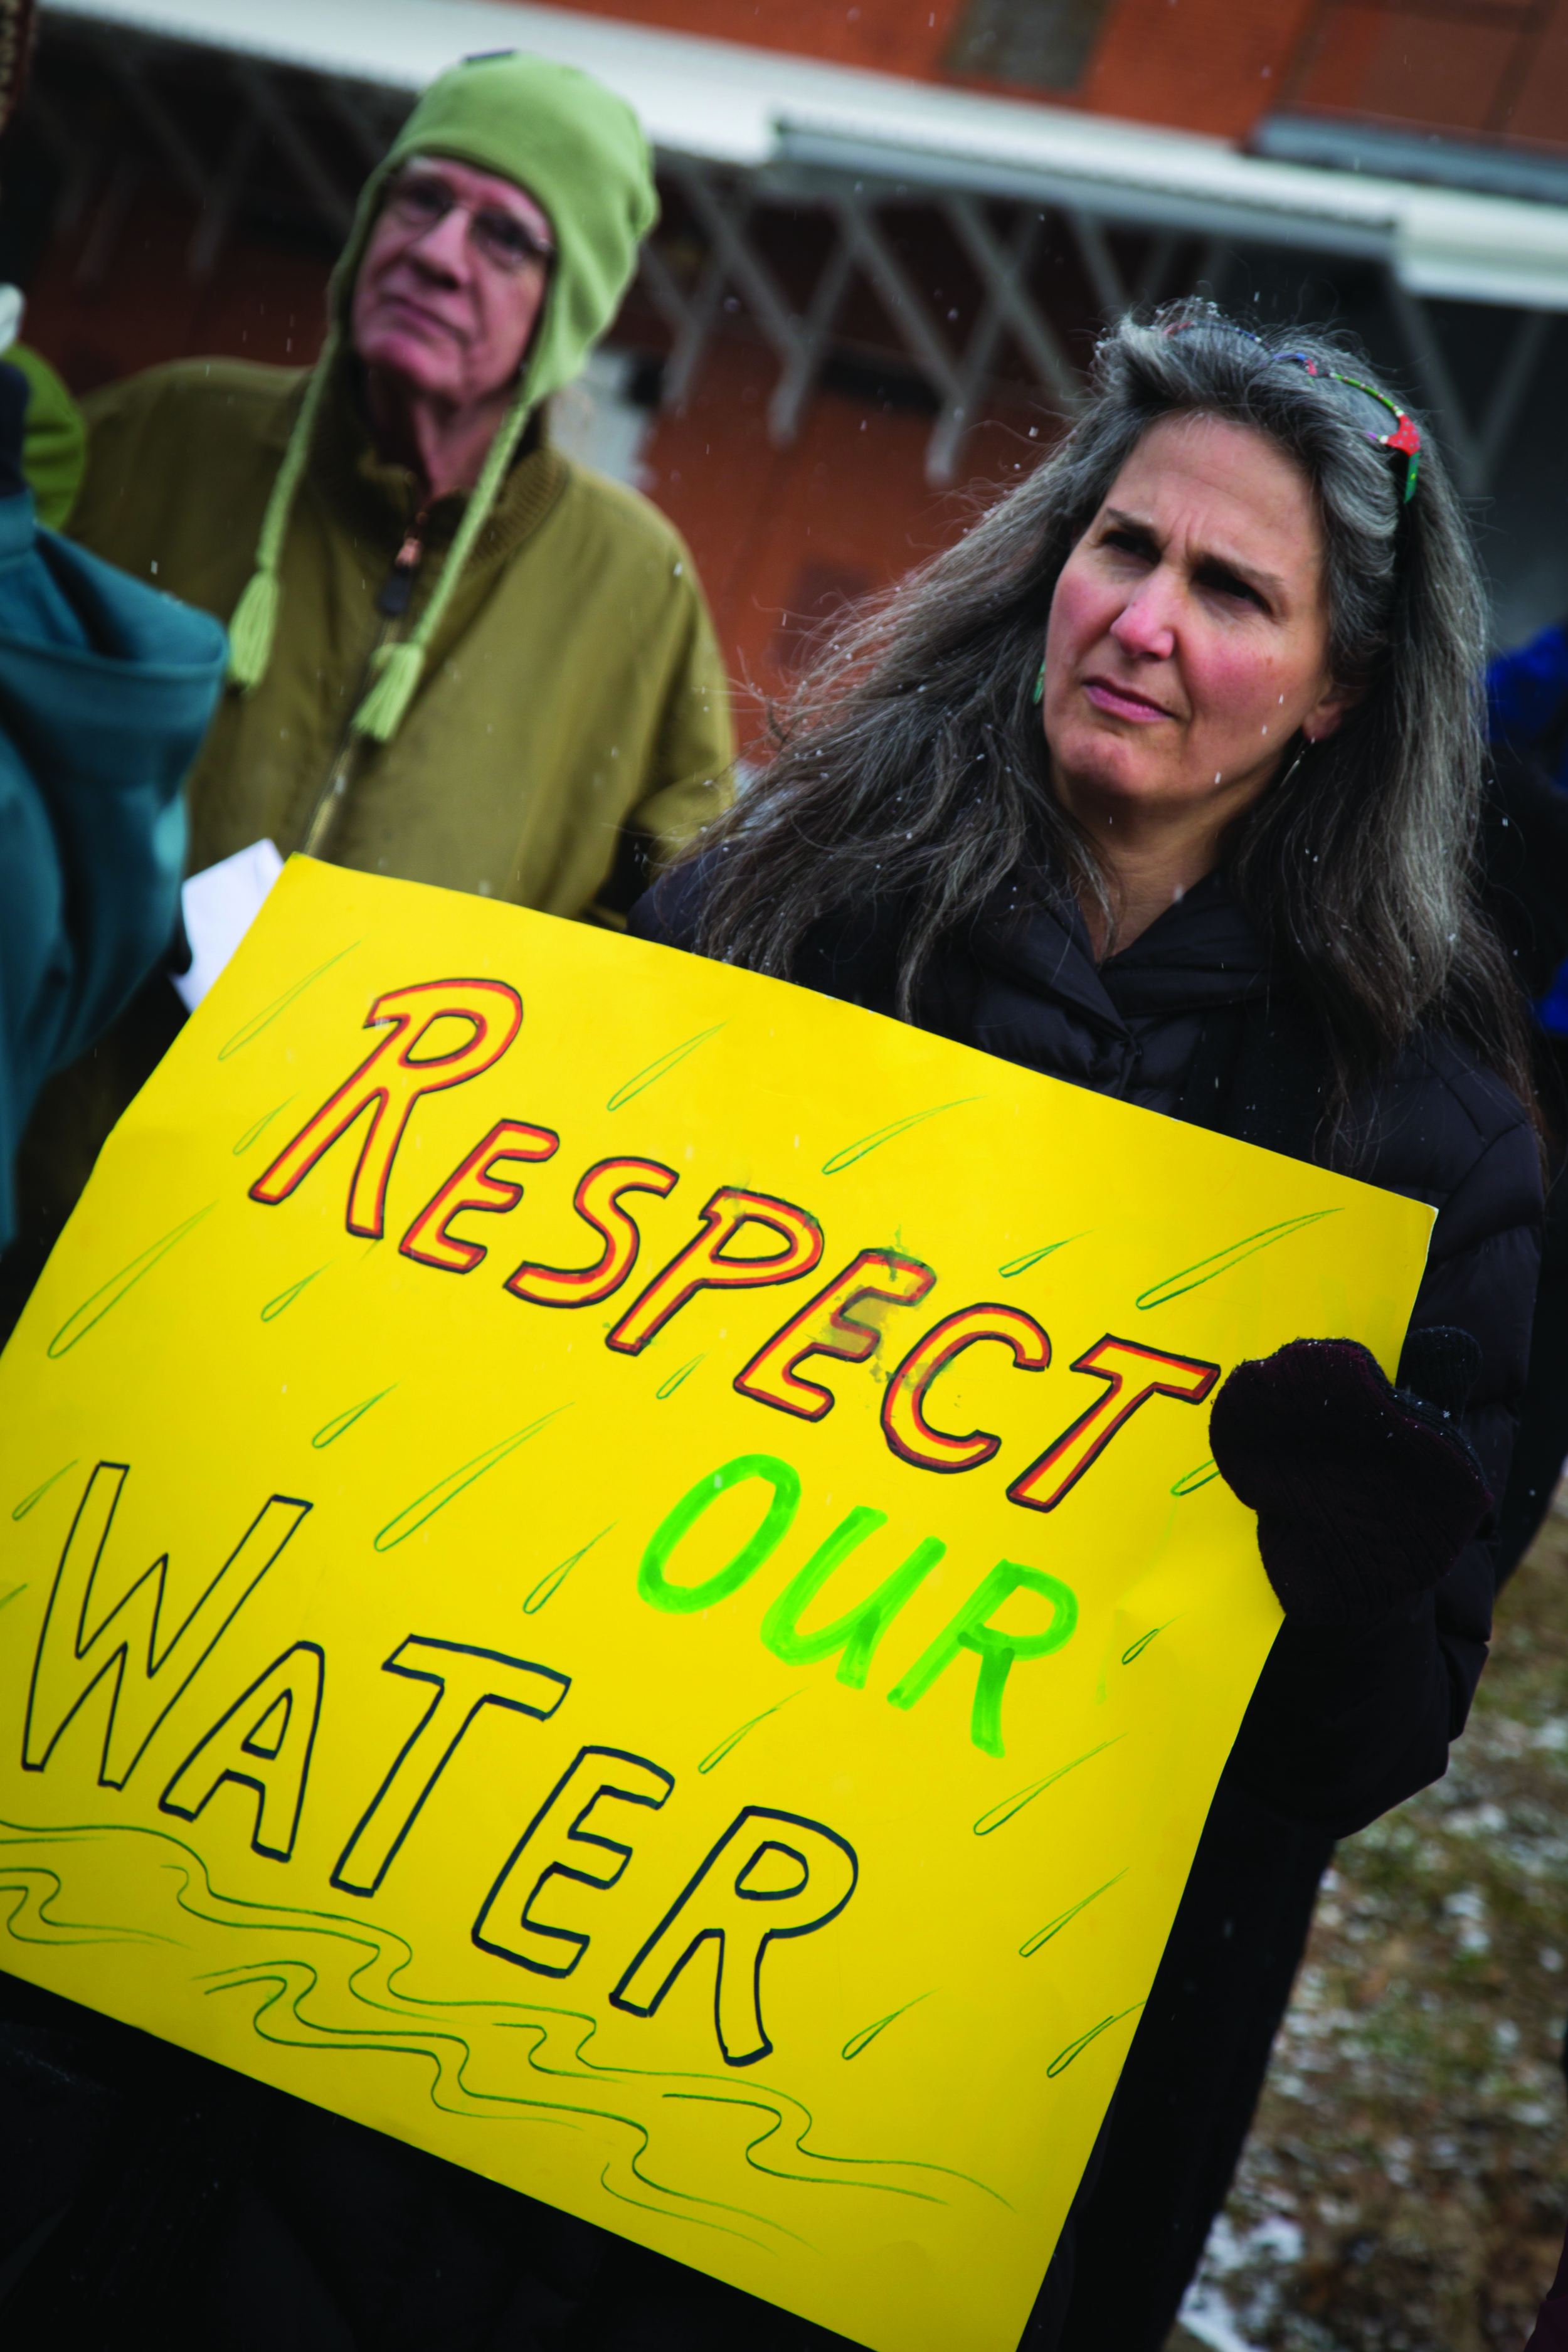  WV Rivers board member Nancy Ward at a clean water rally after the 2014 chemical leak. Photo by Rich Katz 